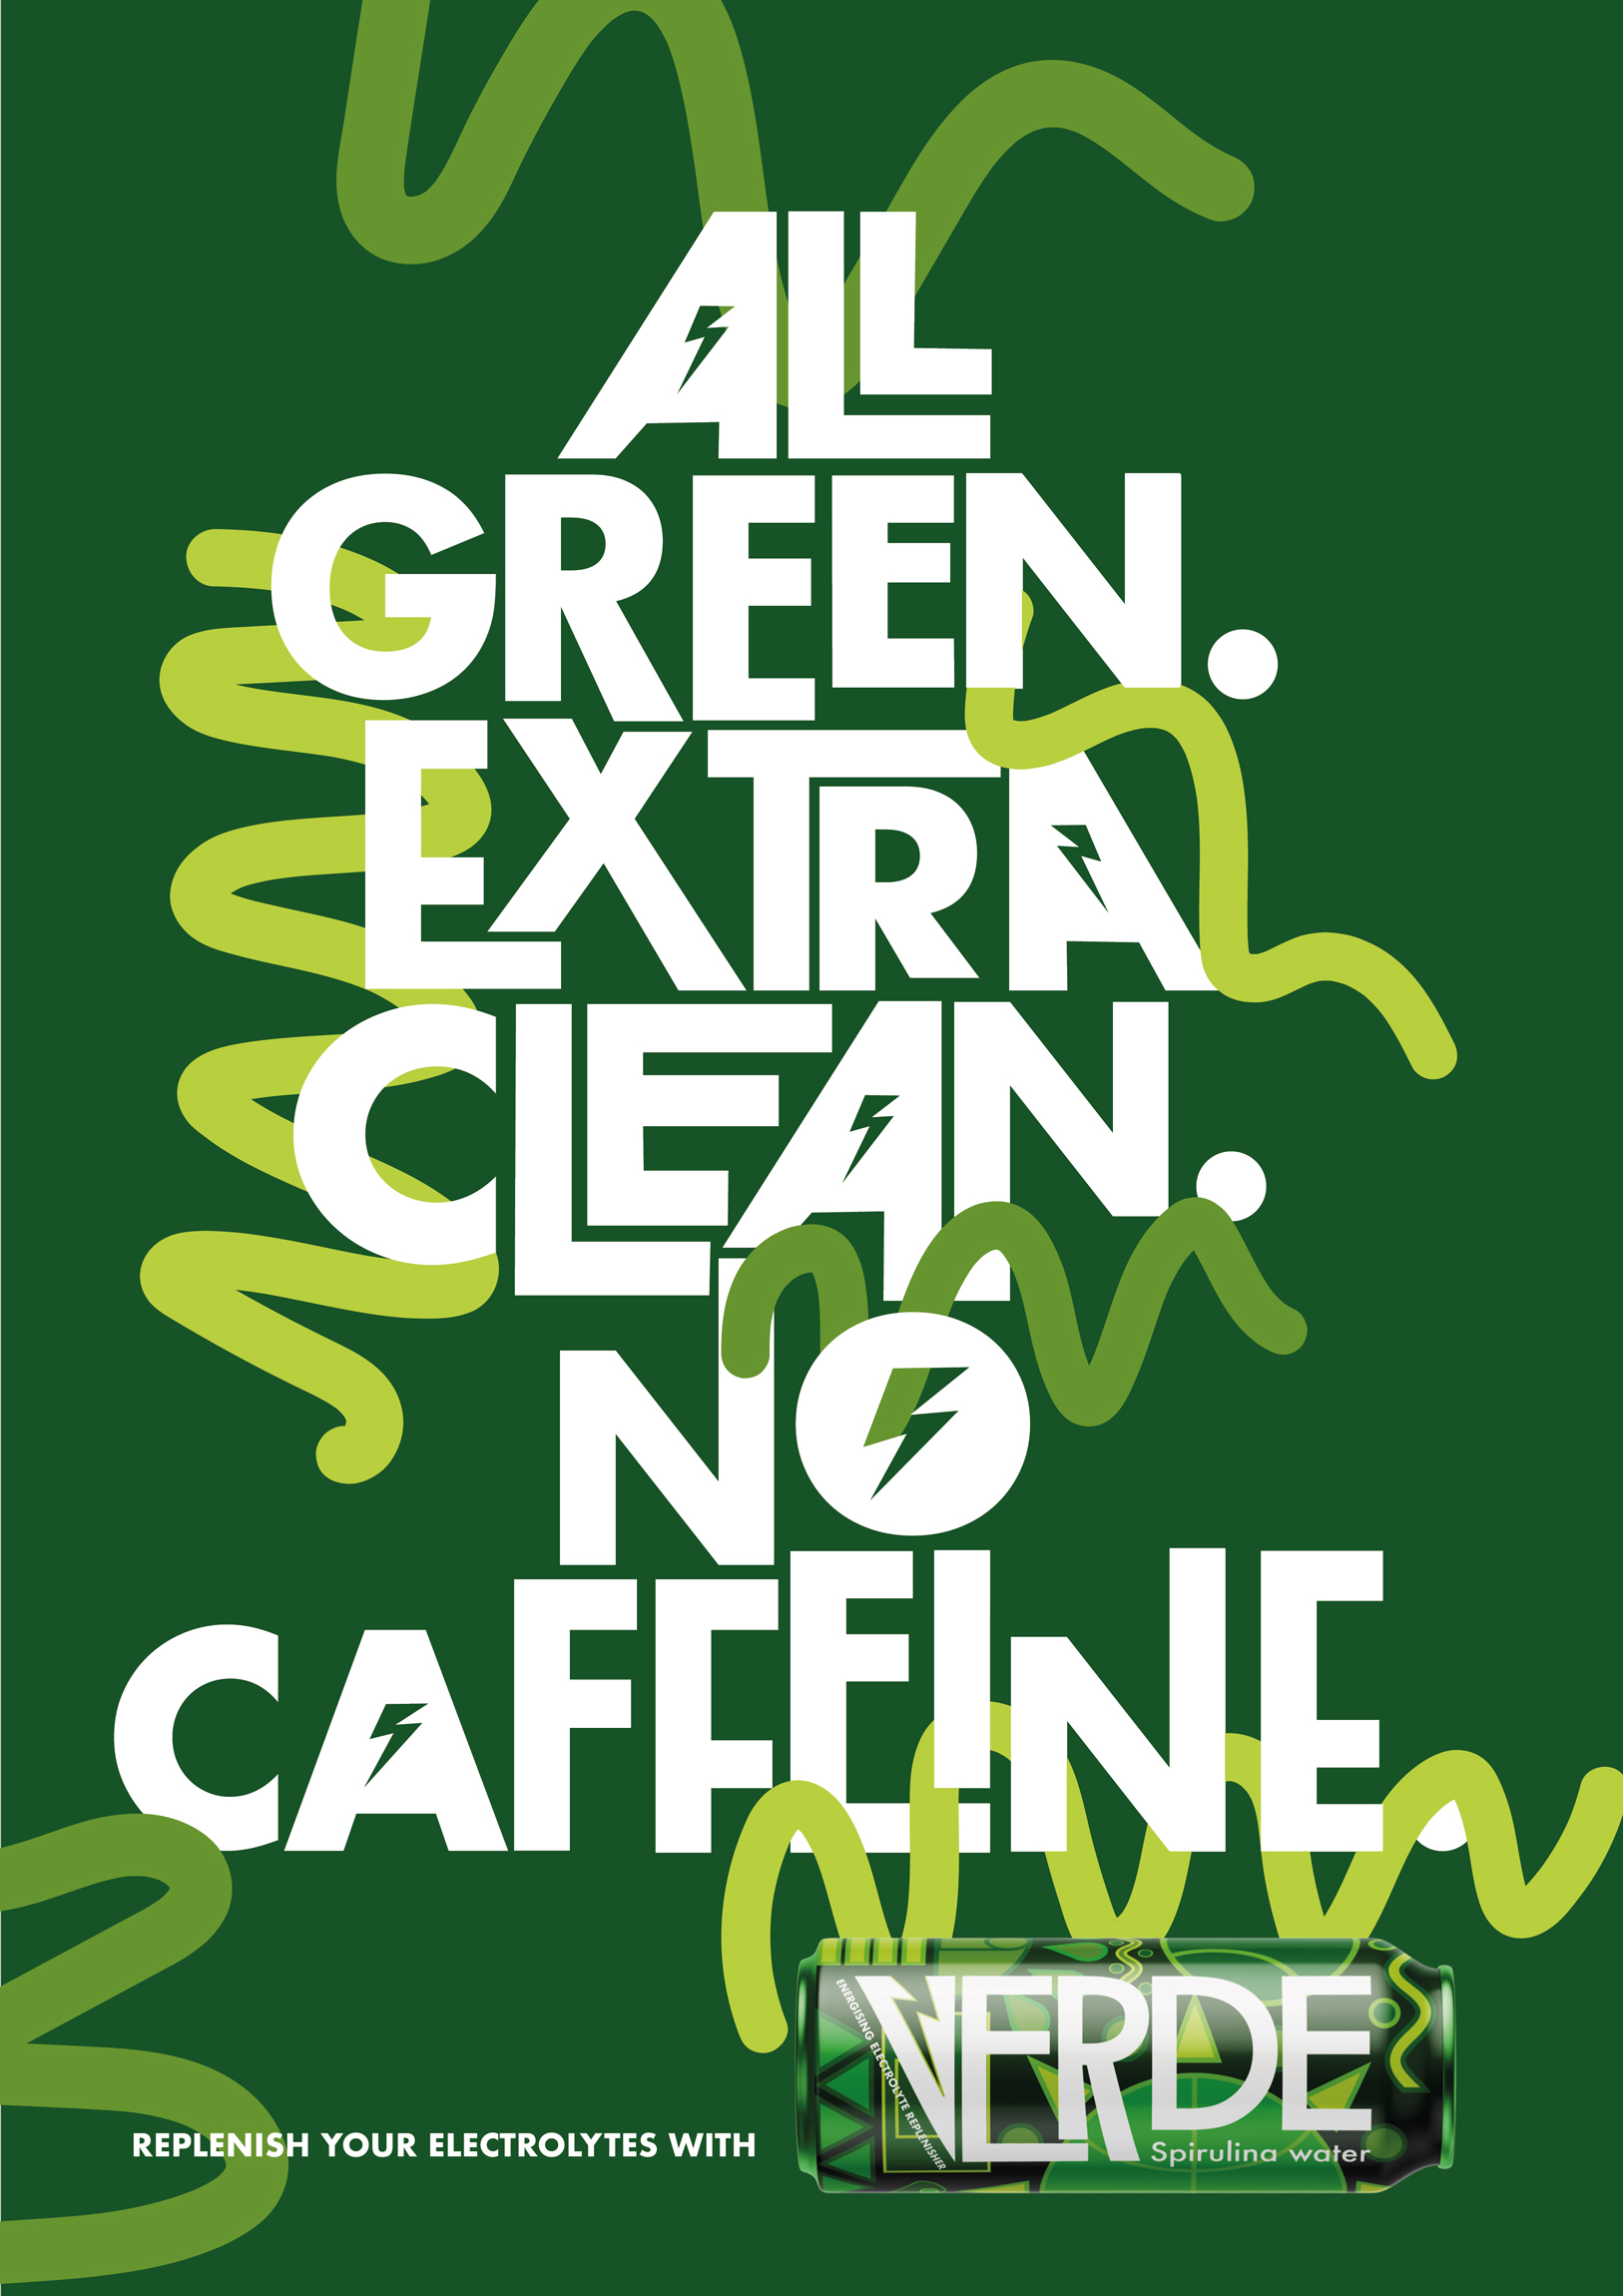 Poster by Lois Brandon showing catchy copy ' All Green Extra Clean No Caffeine' in a playful white typeface on dark green background with colourful green squiggles.